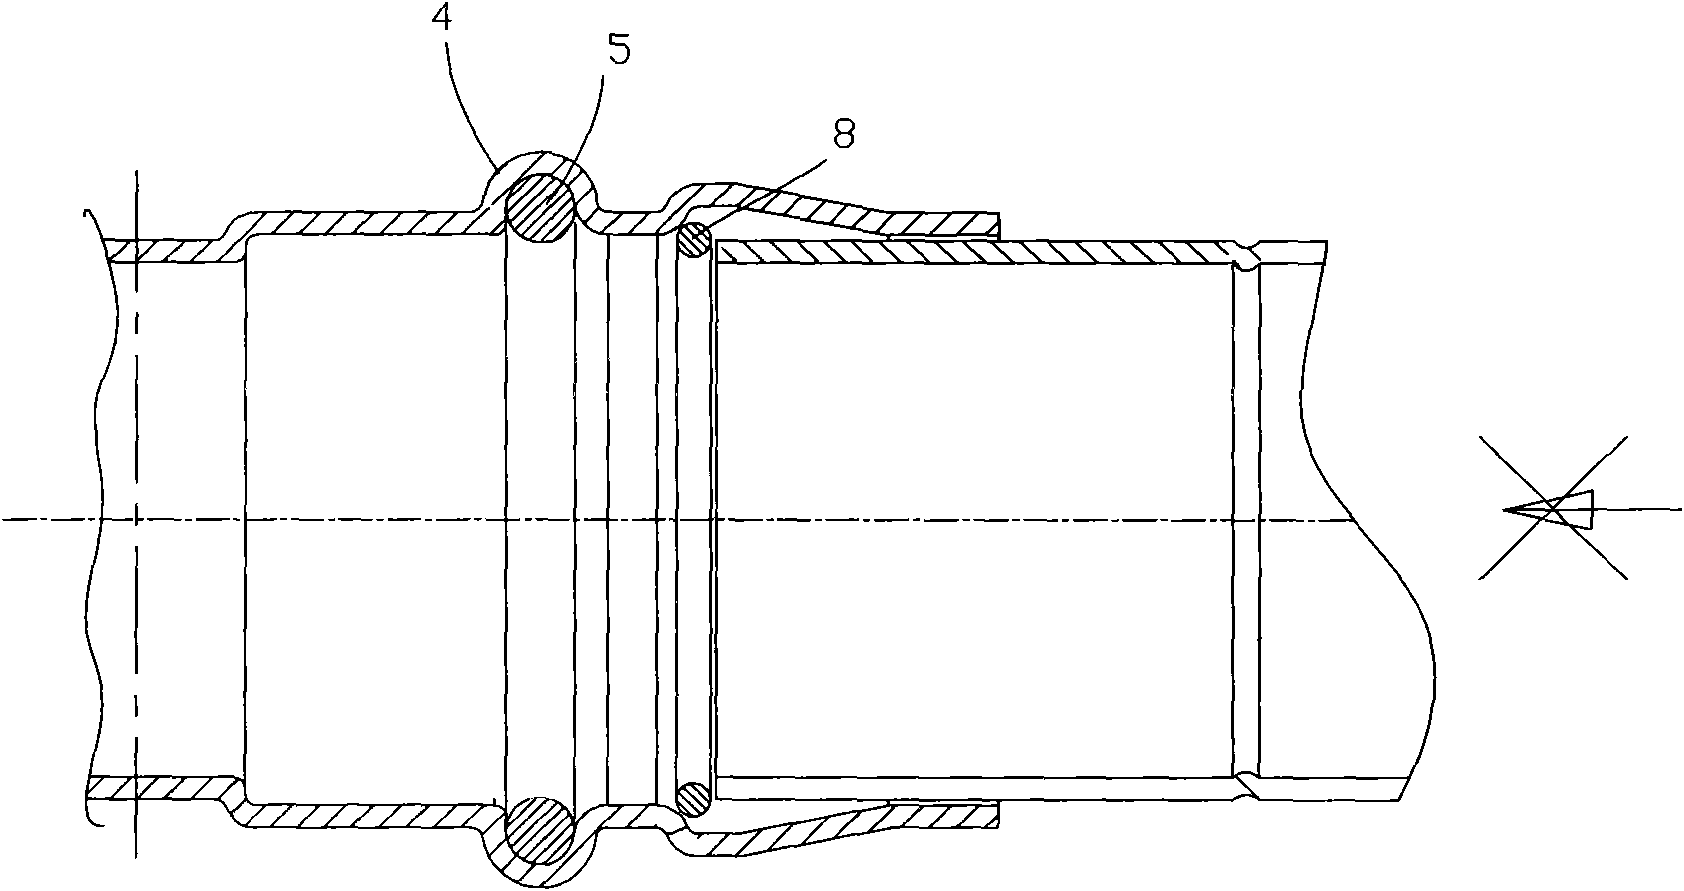 Directly-pushing connecting pipe joint